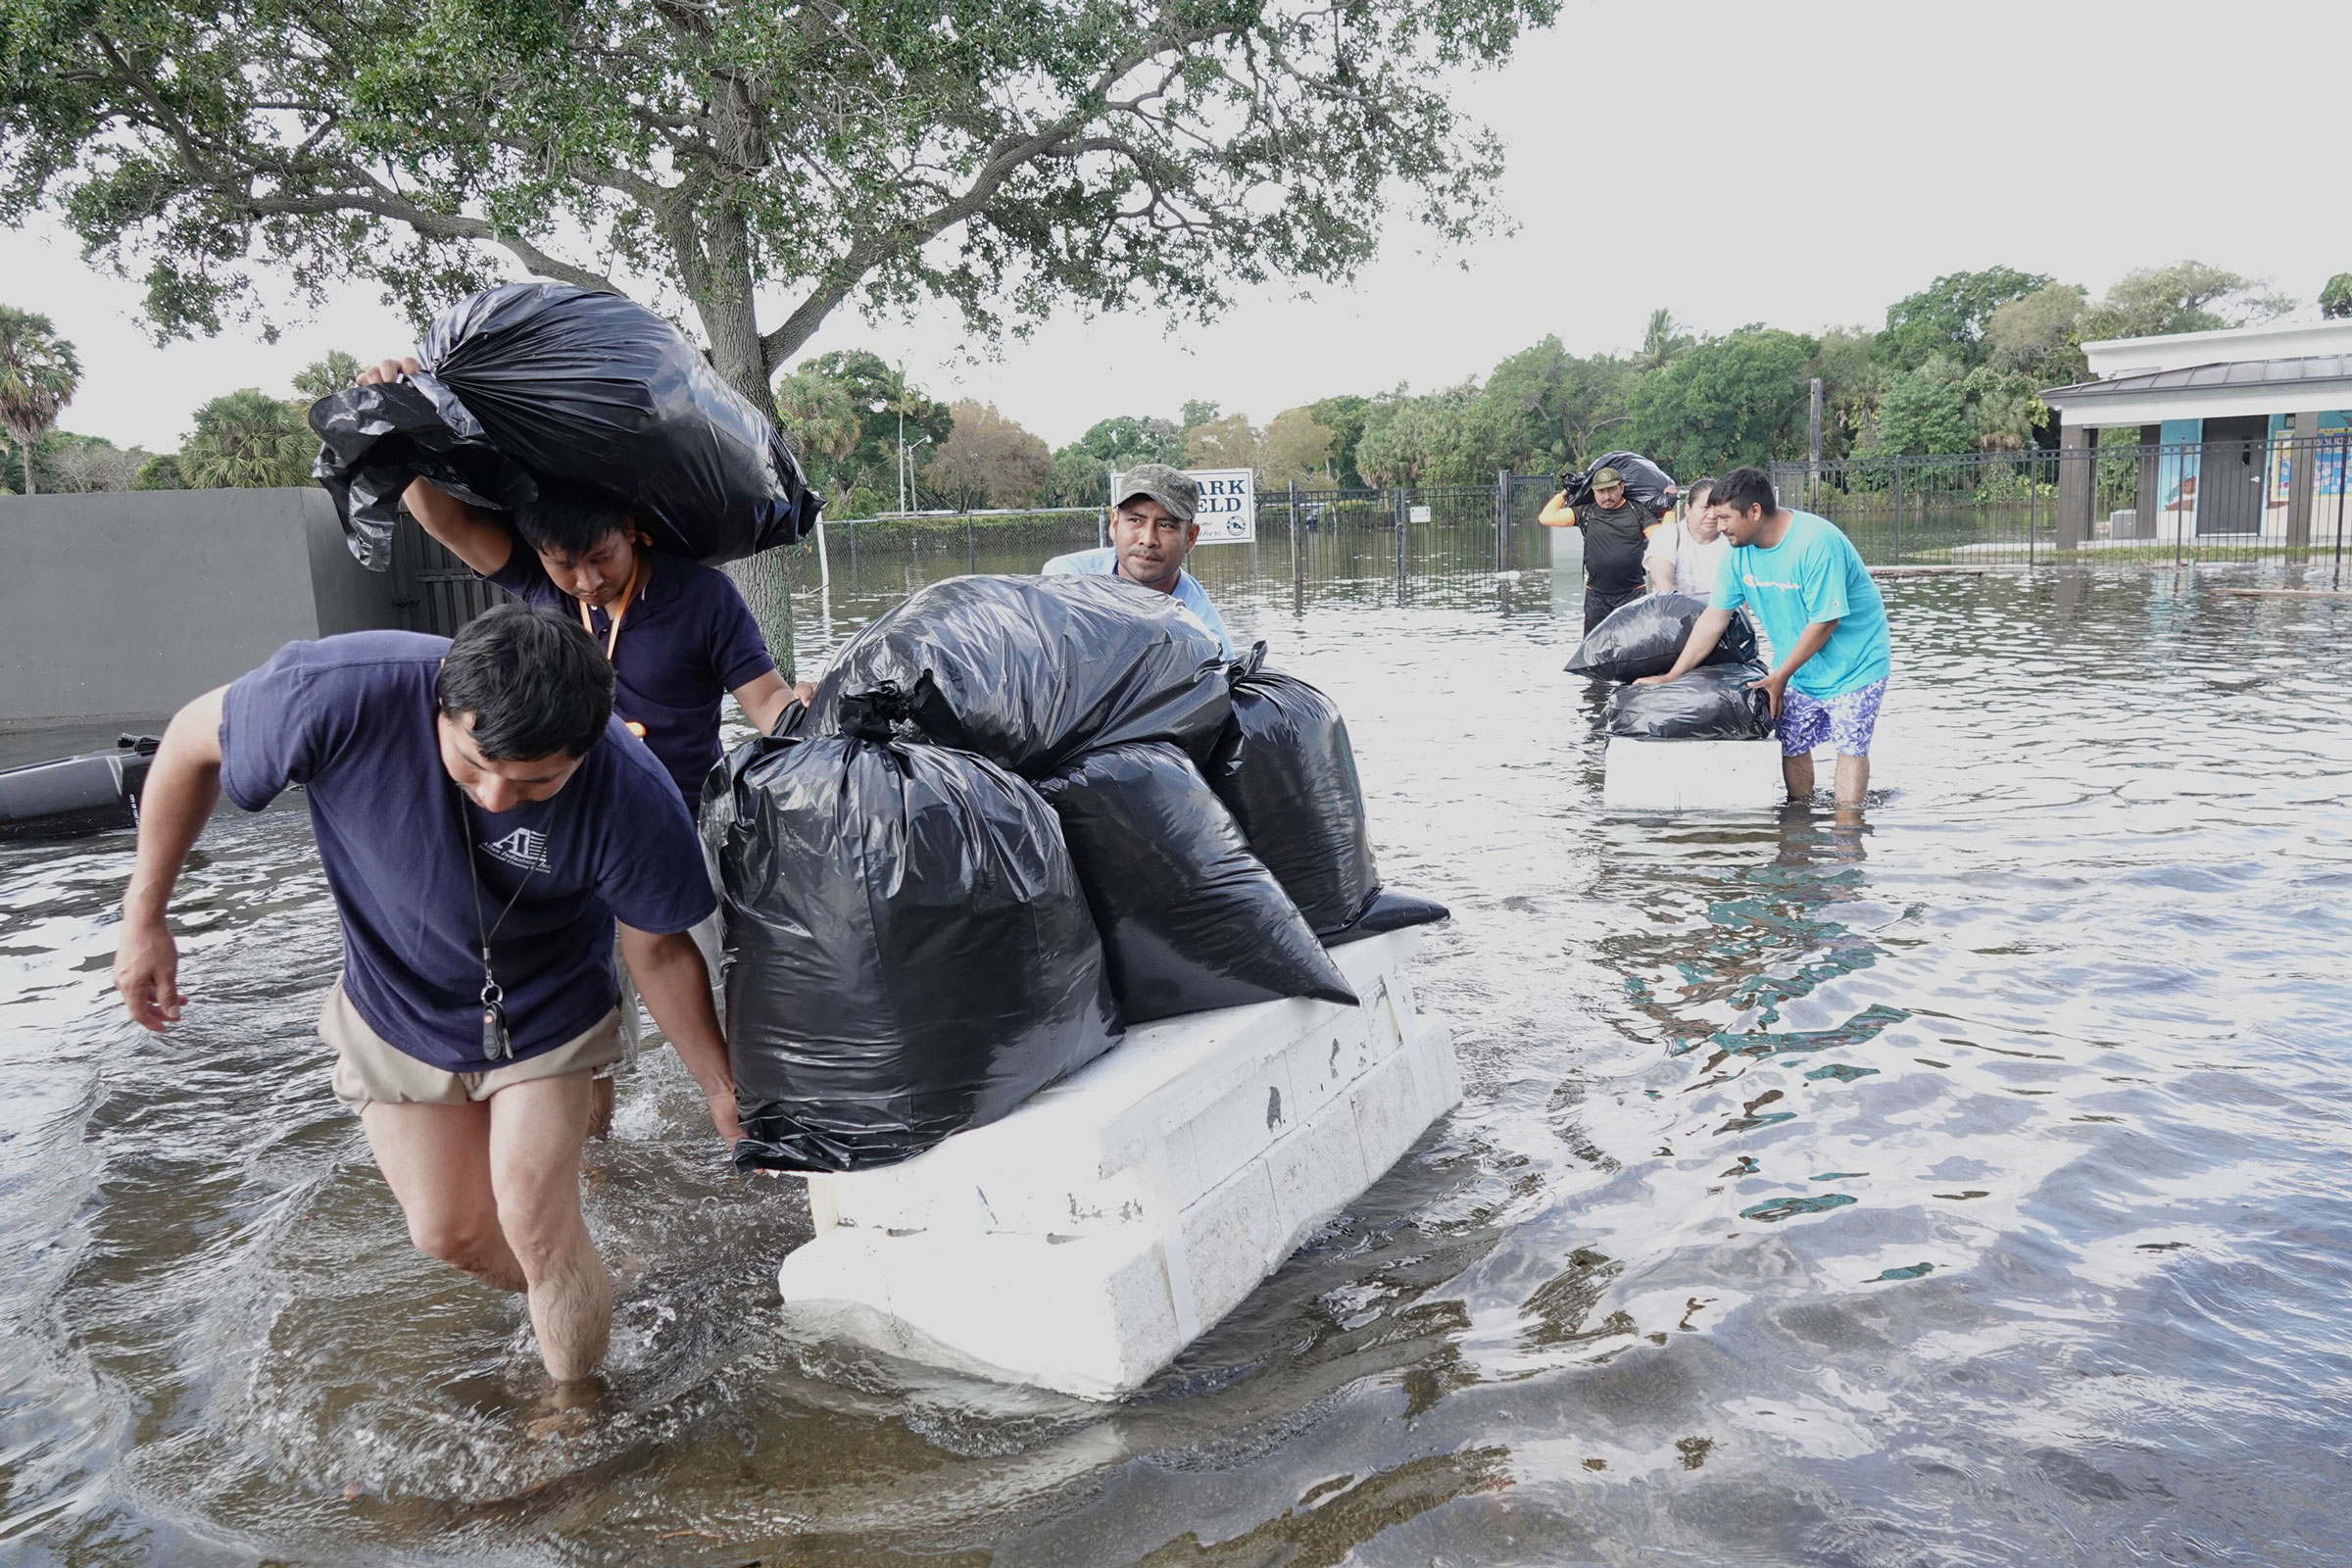 People try to save valuables as they wade through flood waters in the Edgewood neighborhood of Fort Lauderdale, Fla., on April 13, 2023. (Joe Cavaretta—South Florida Sun Sentinel/Tribune News Service/Getty Images)